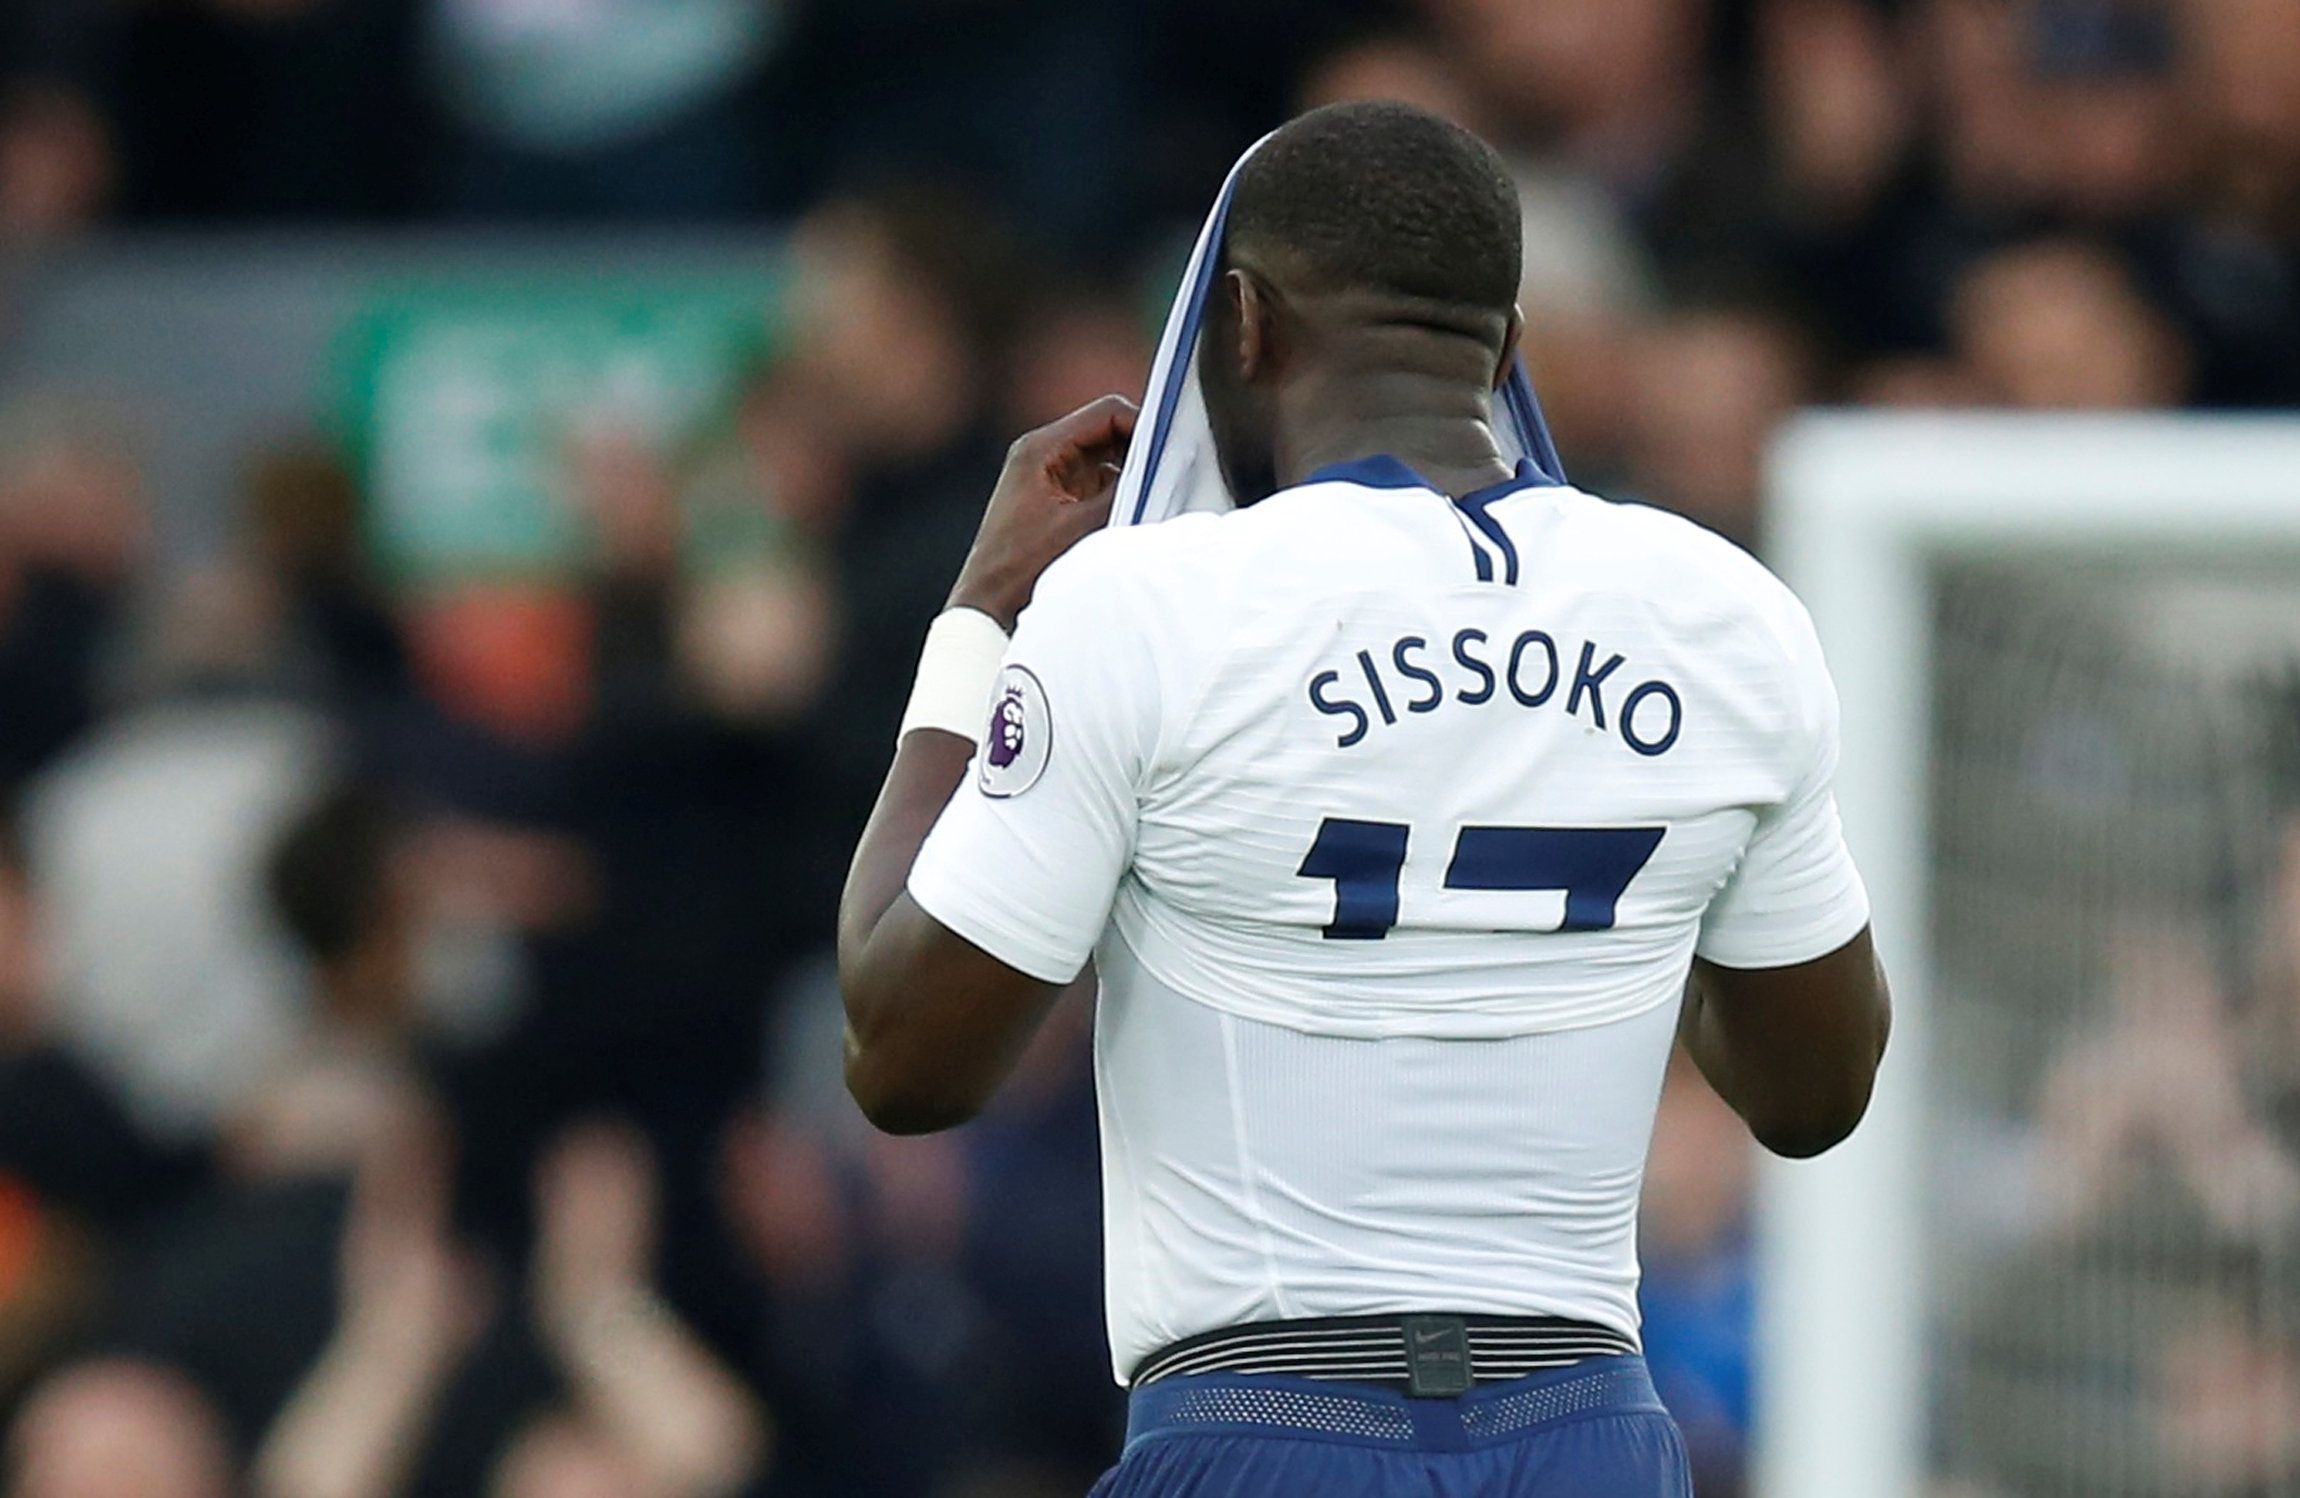 Tottenham midfielder Moussa Sissoko puts his shirt over his head following his missed chance